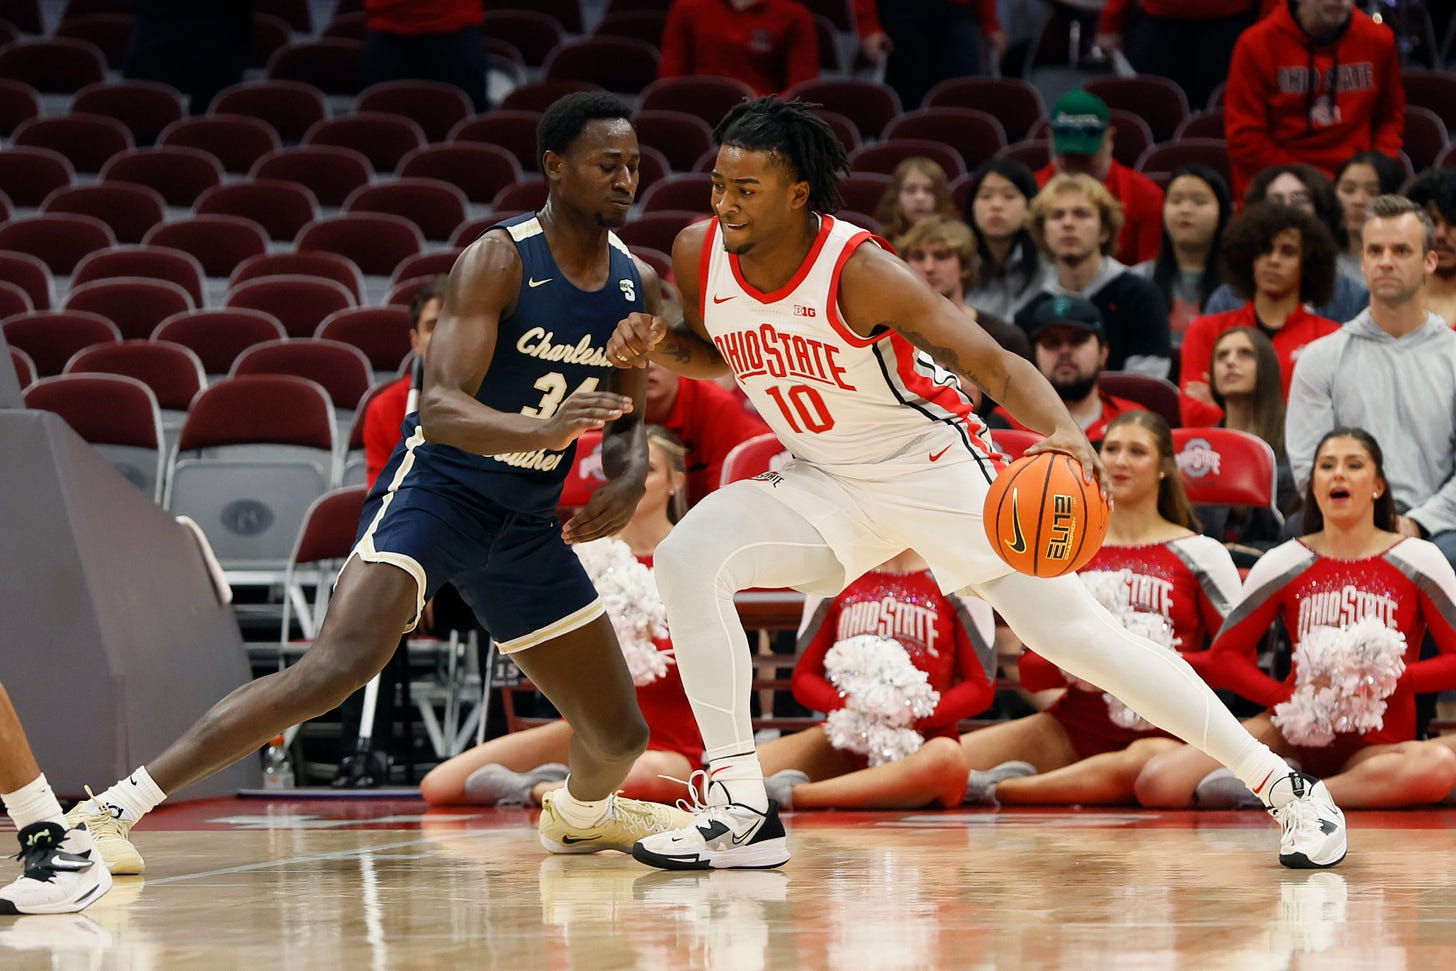 Key's double-double powers Ohio St. past Charleston Southern